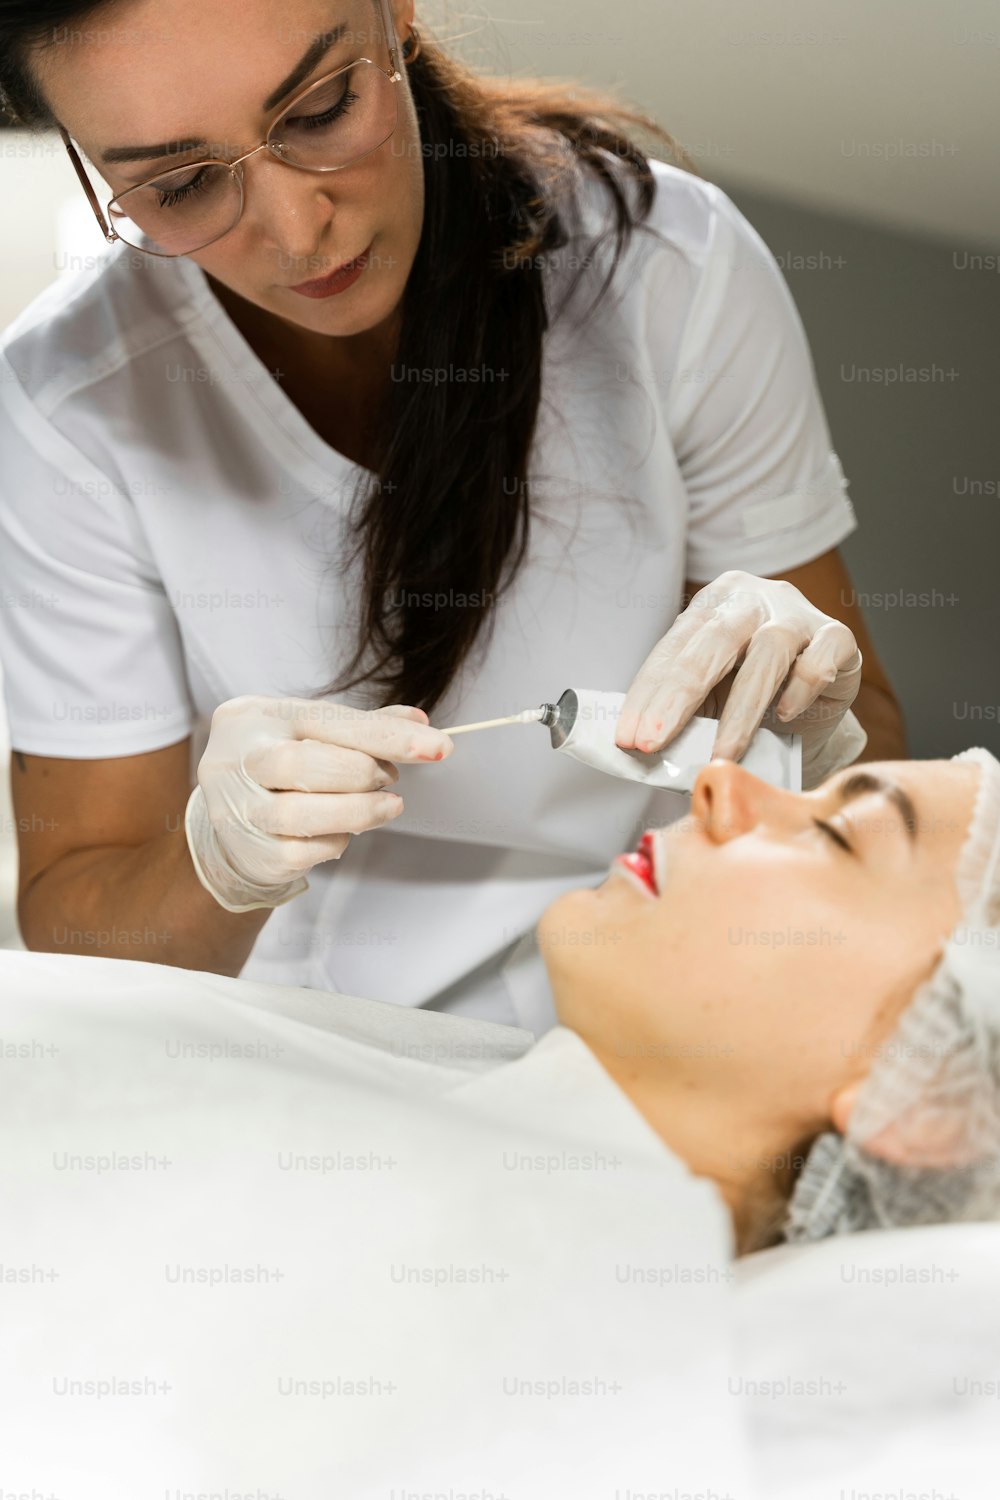 Professional permanent make-up artist and her client during lip blushing procedure